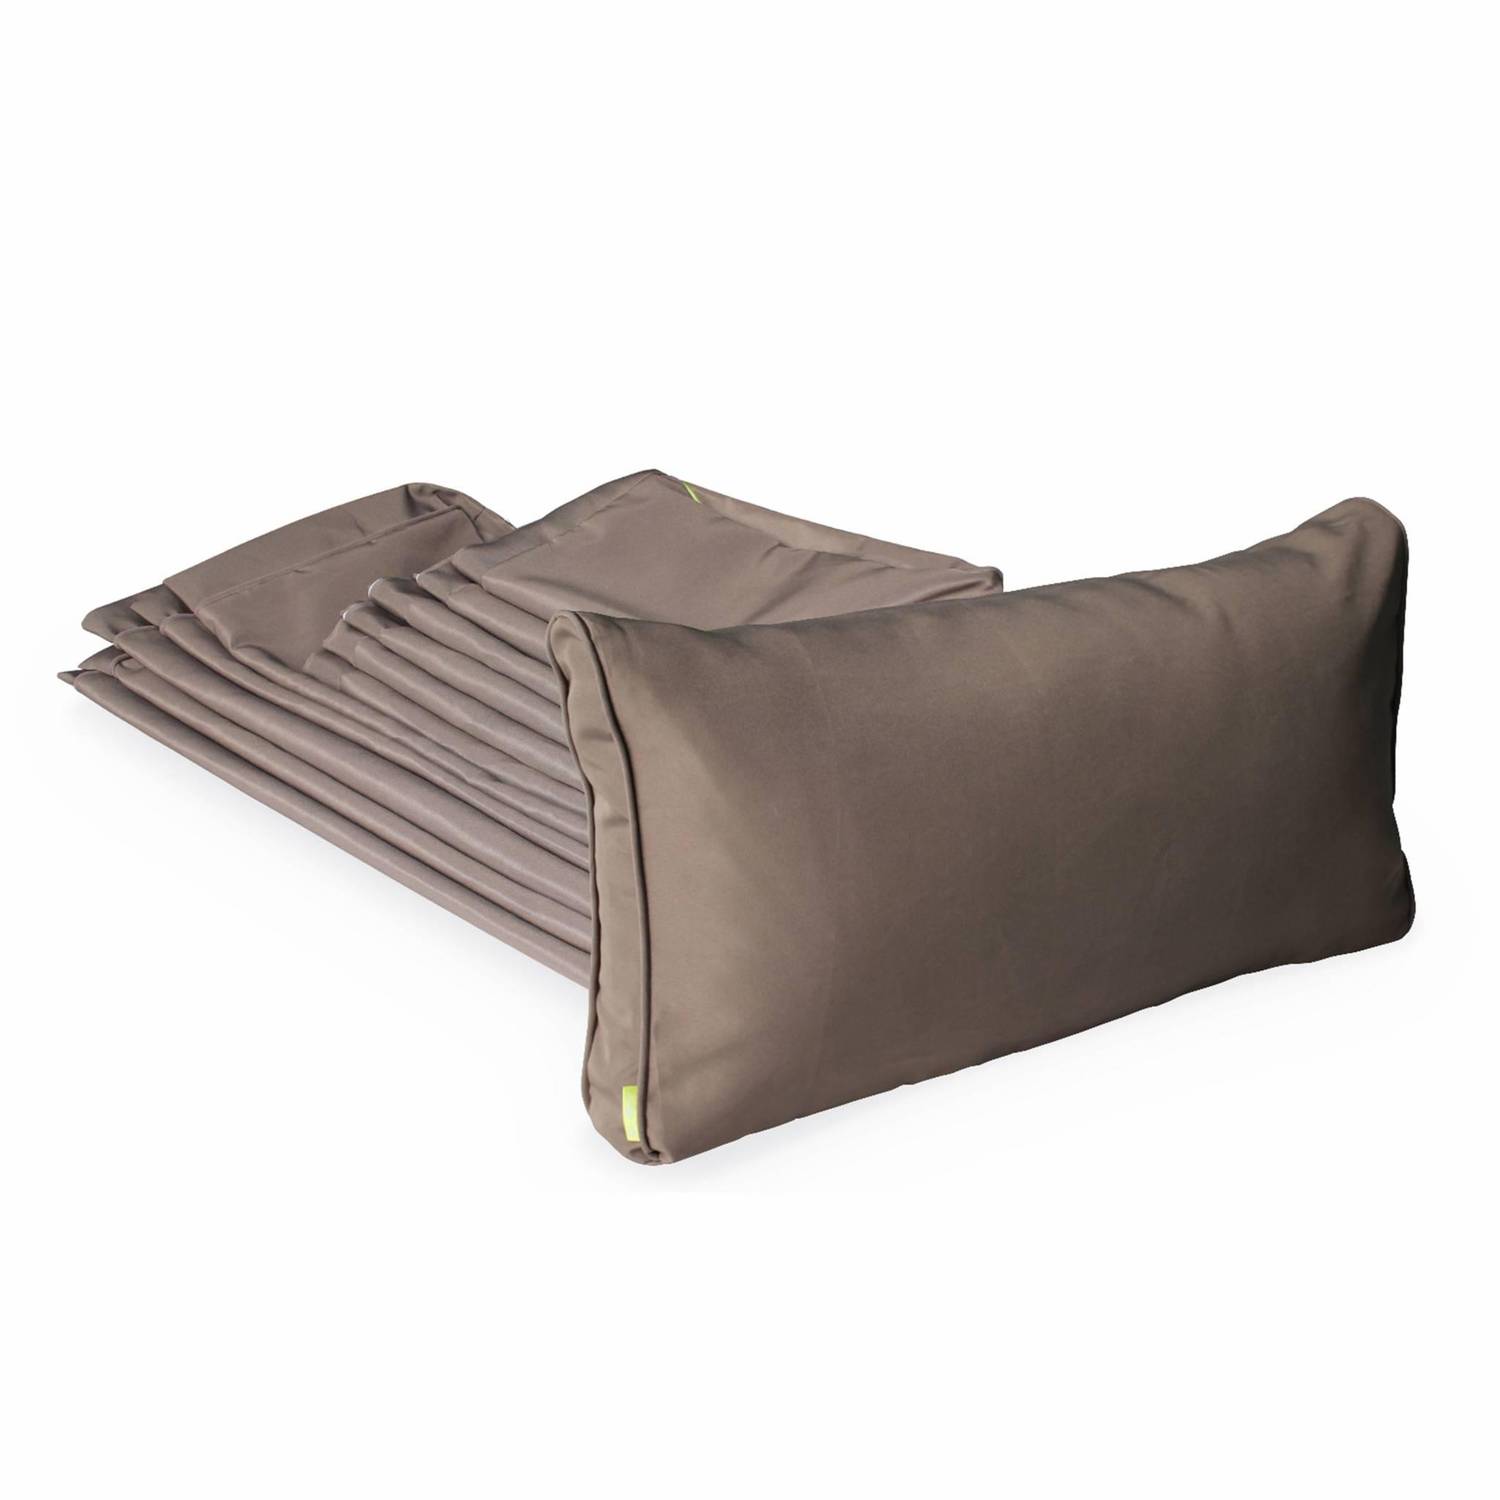 Complete set of cushion covers - Napoli - Beige-Brown Photo1